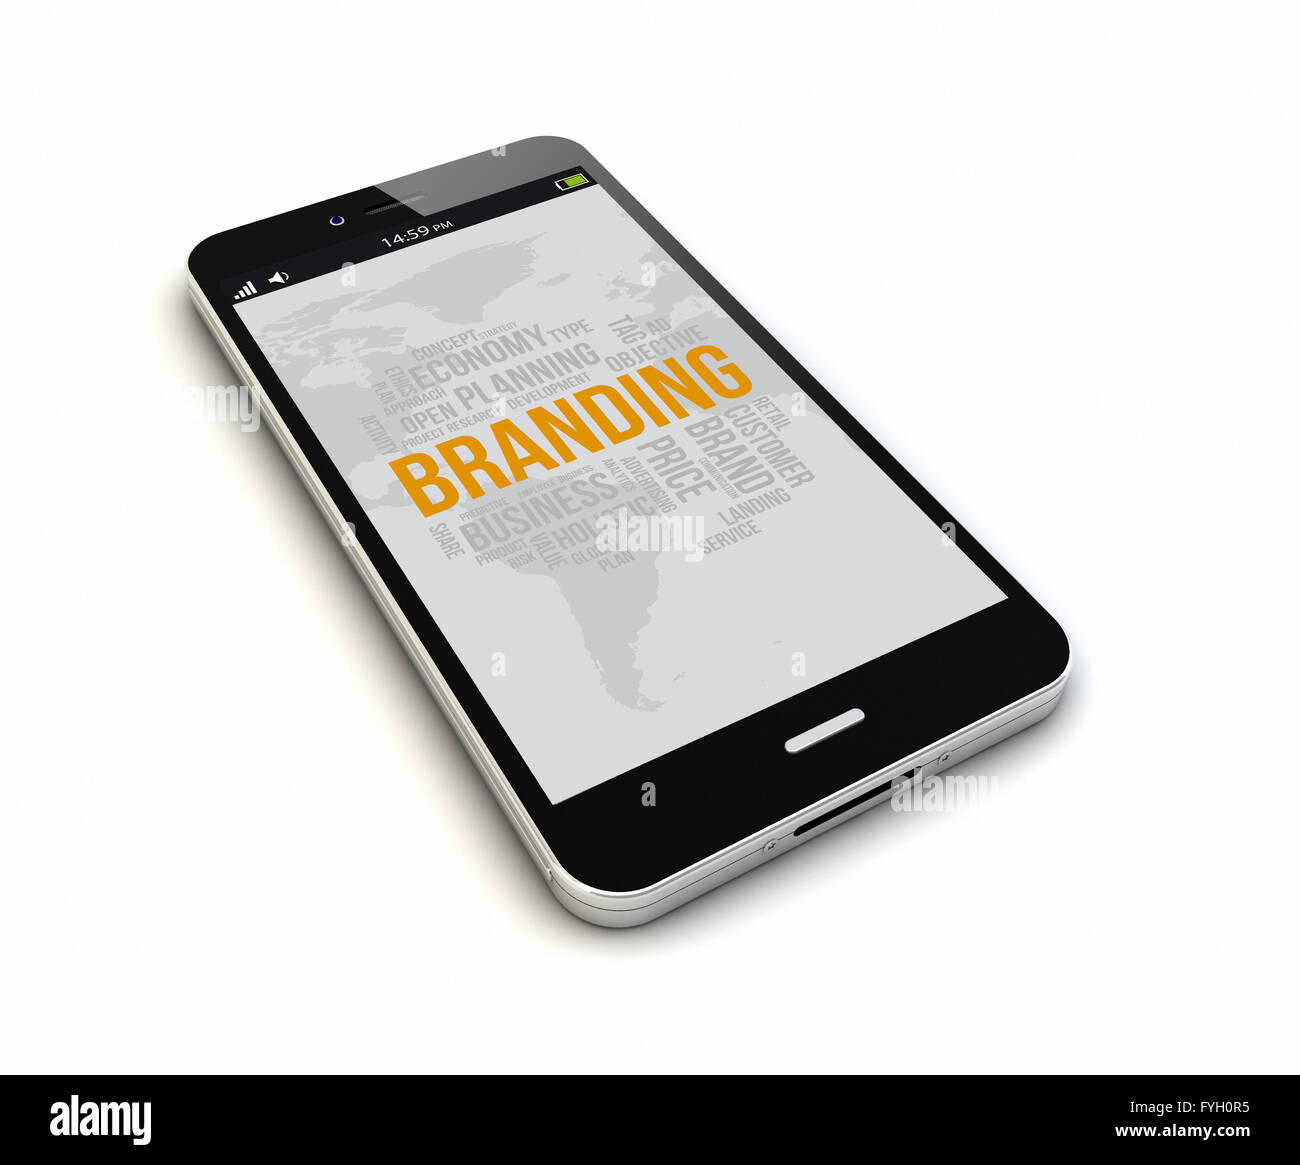 render of an original smartphone with mobile branding on the screen. Screen graphics are made up. Stock Photo